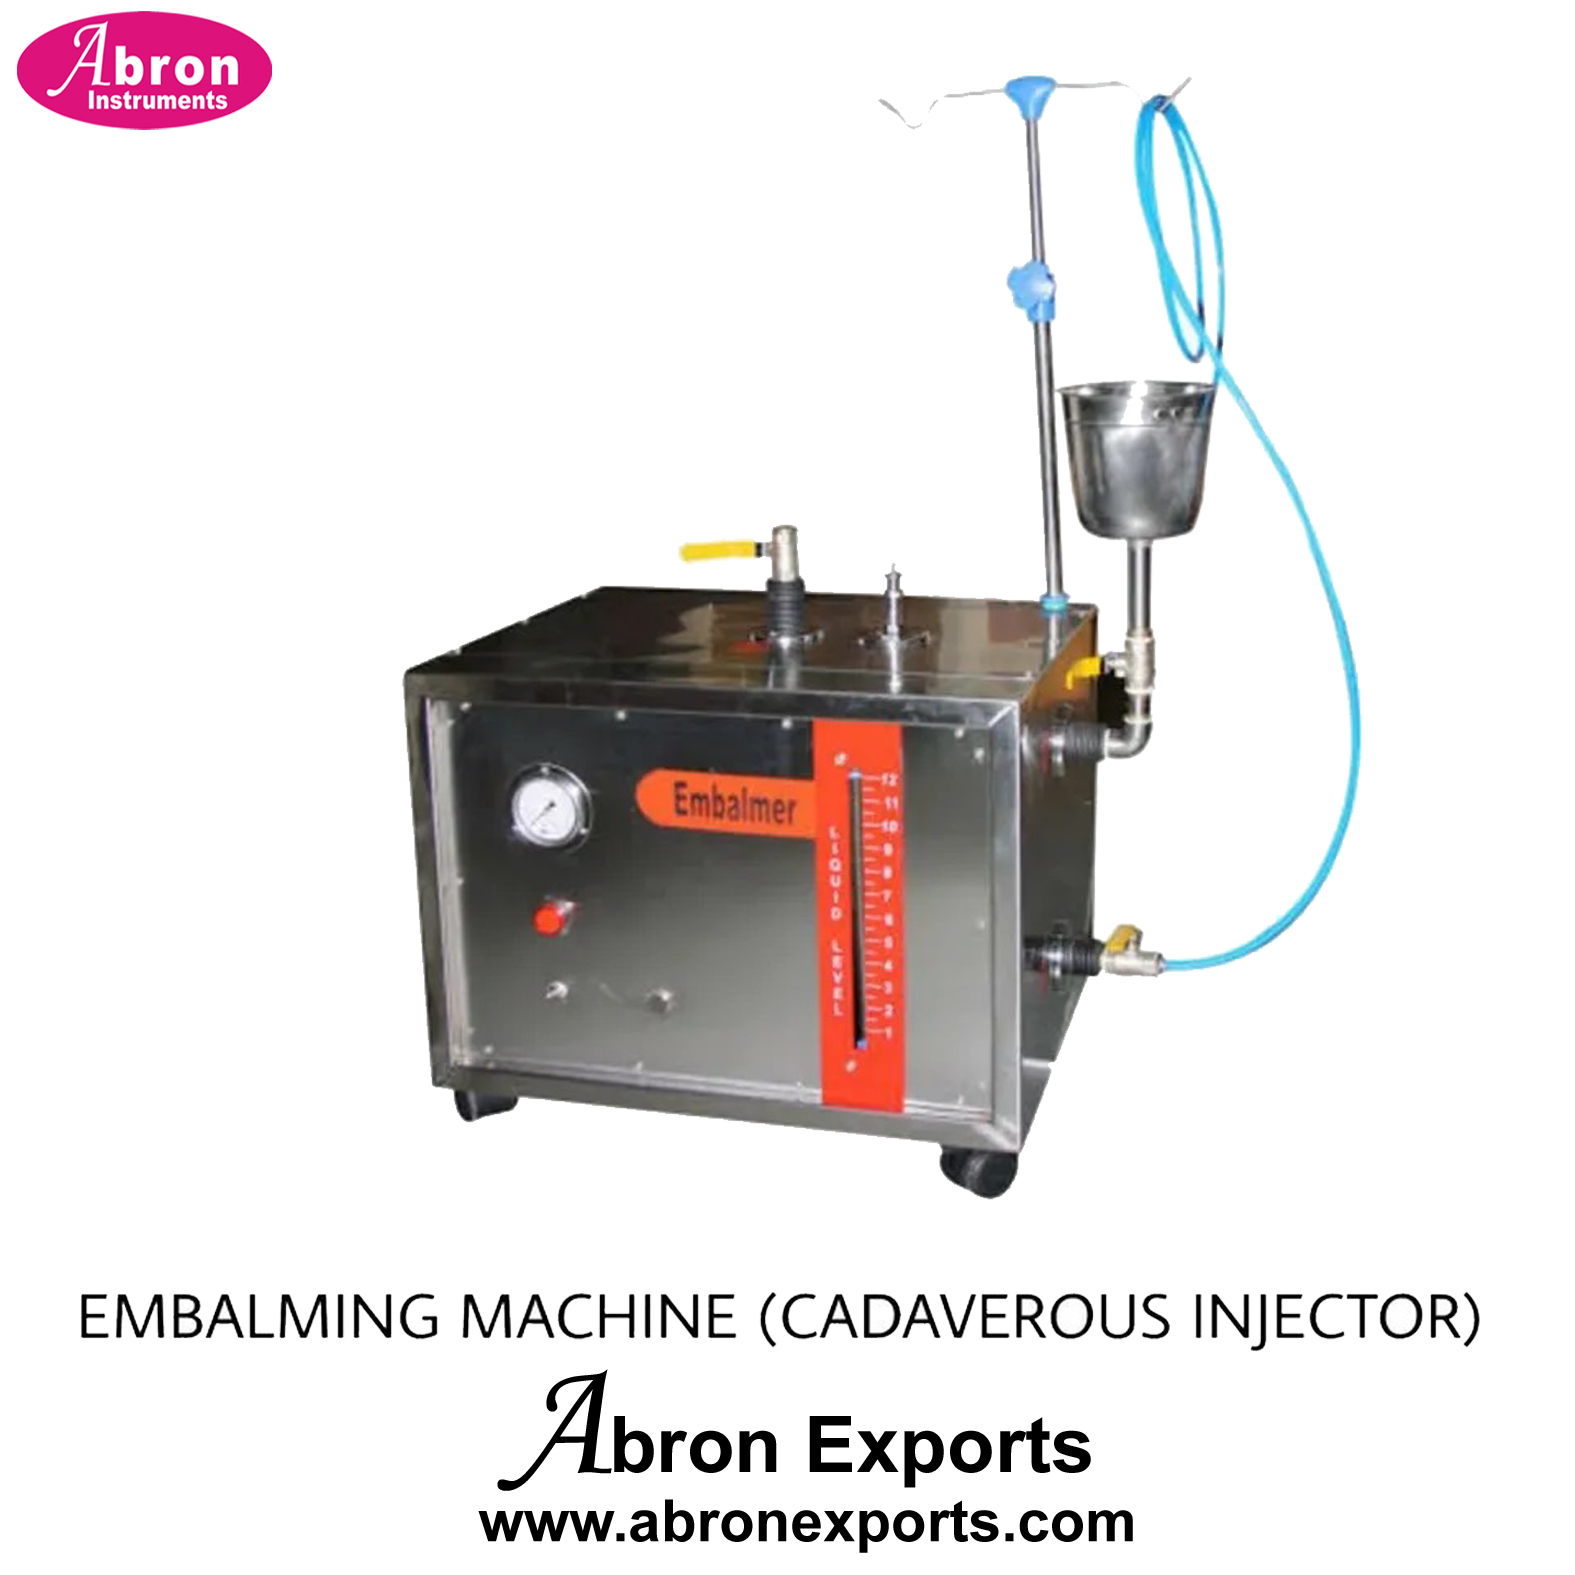 Embalming Machine for cadaver injector with pump gauge wheels portable abron ABM-3551B-CEB